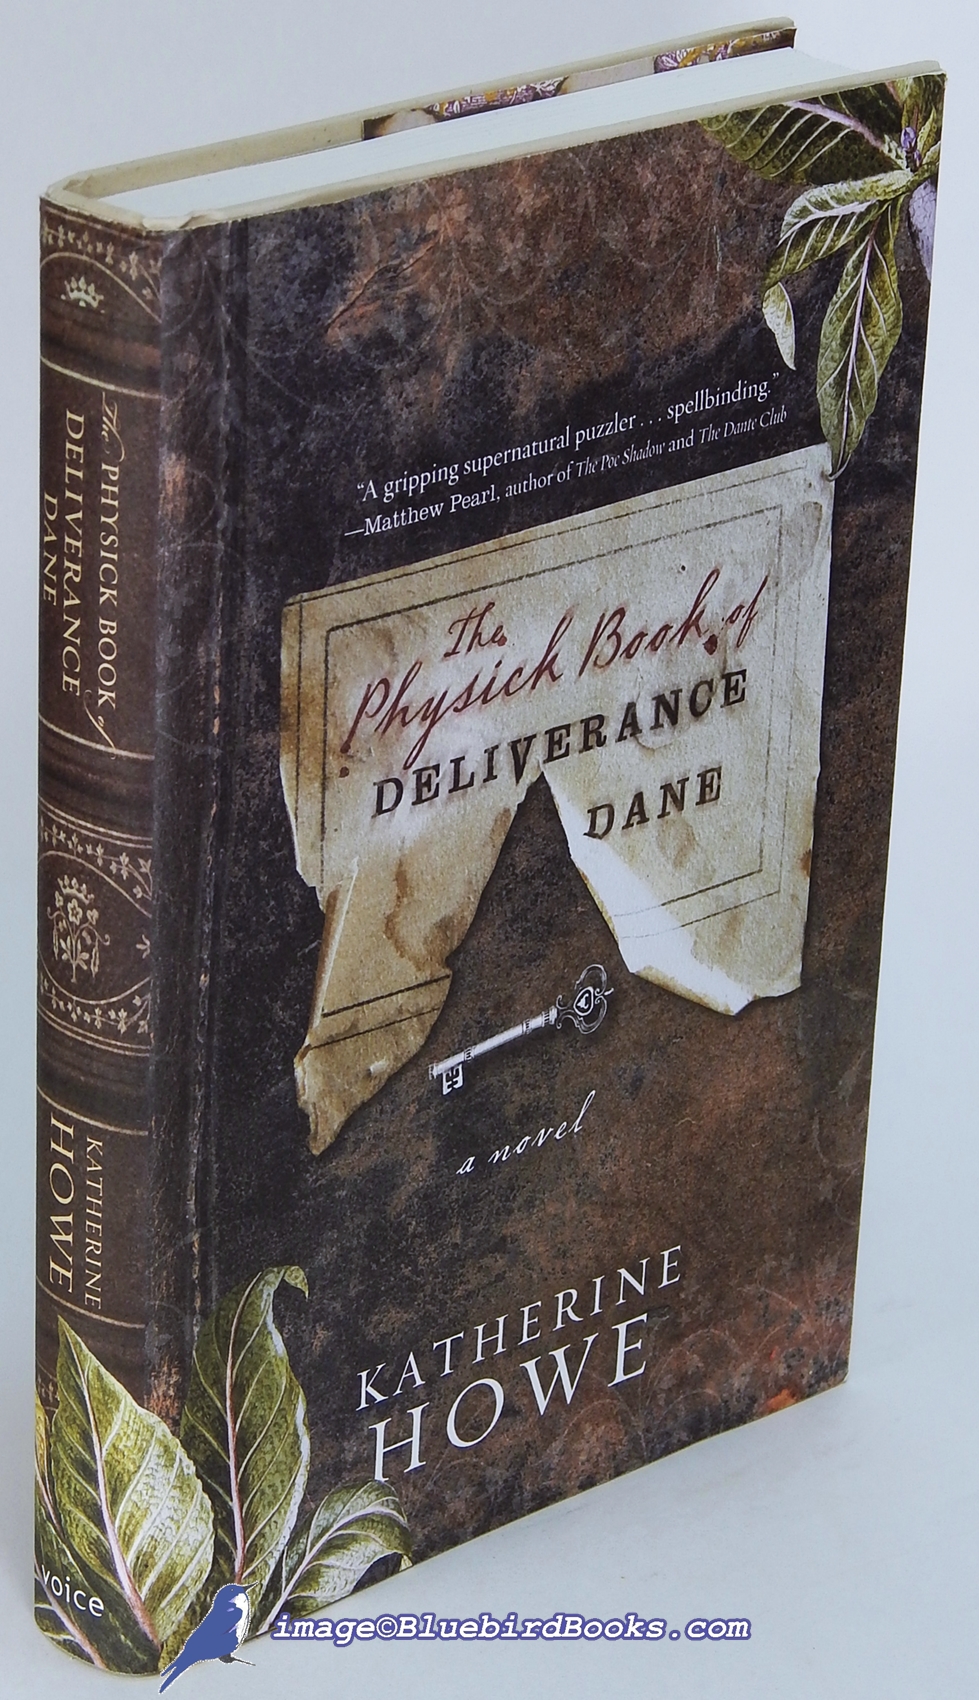 HOWE, KATHERINE - The Physick Book of Deliverance Dane